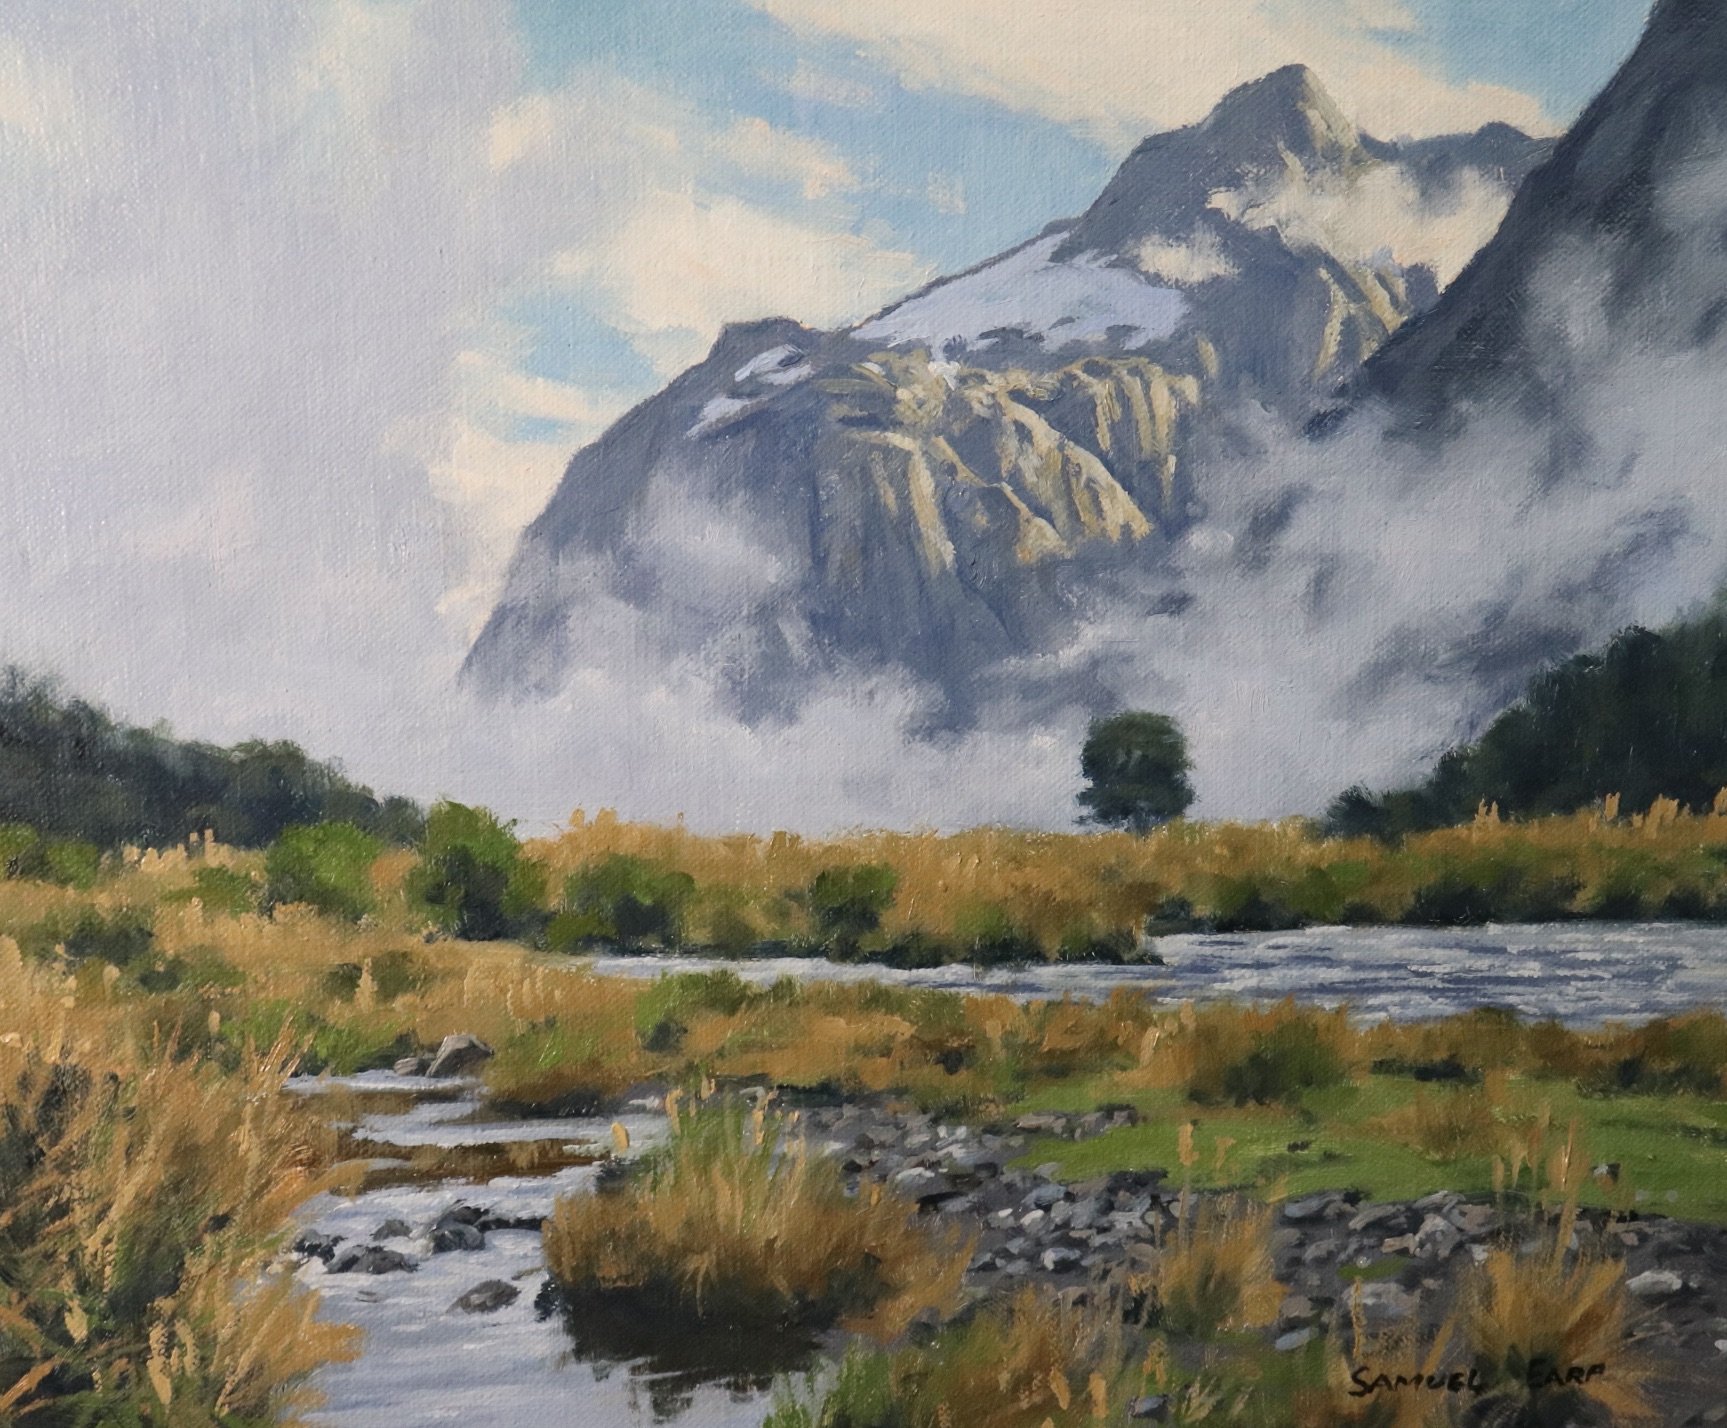 How to Paint a Misty Mountain Landscape